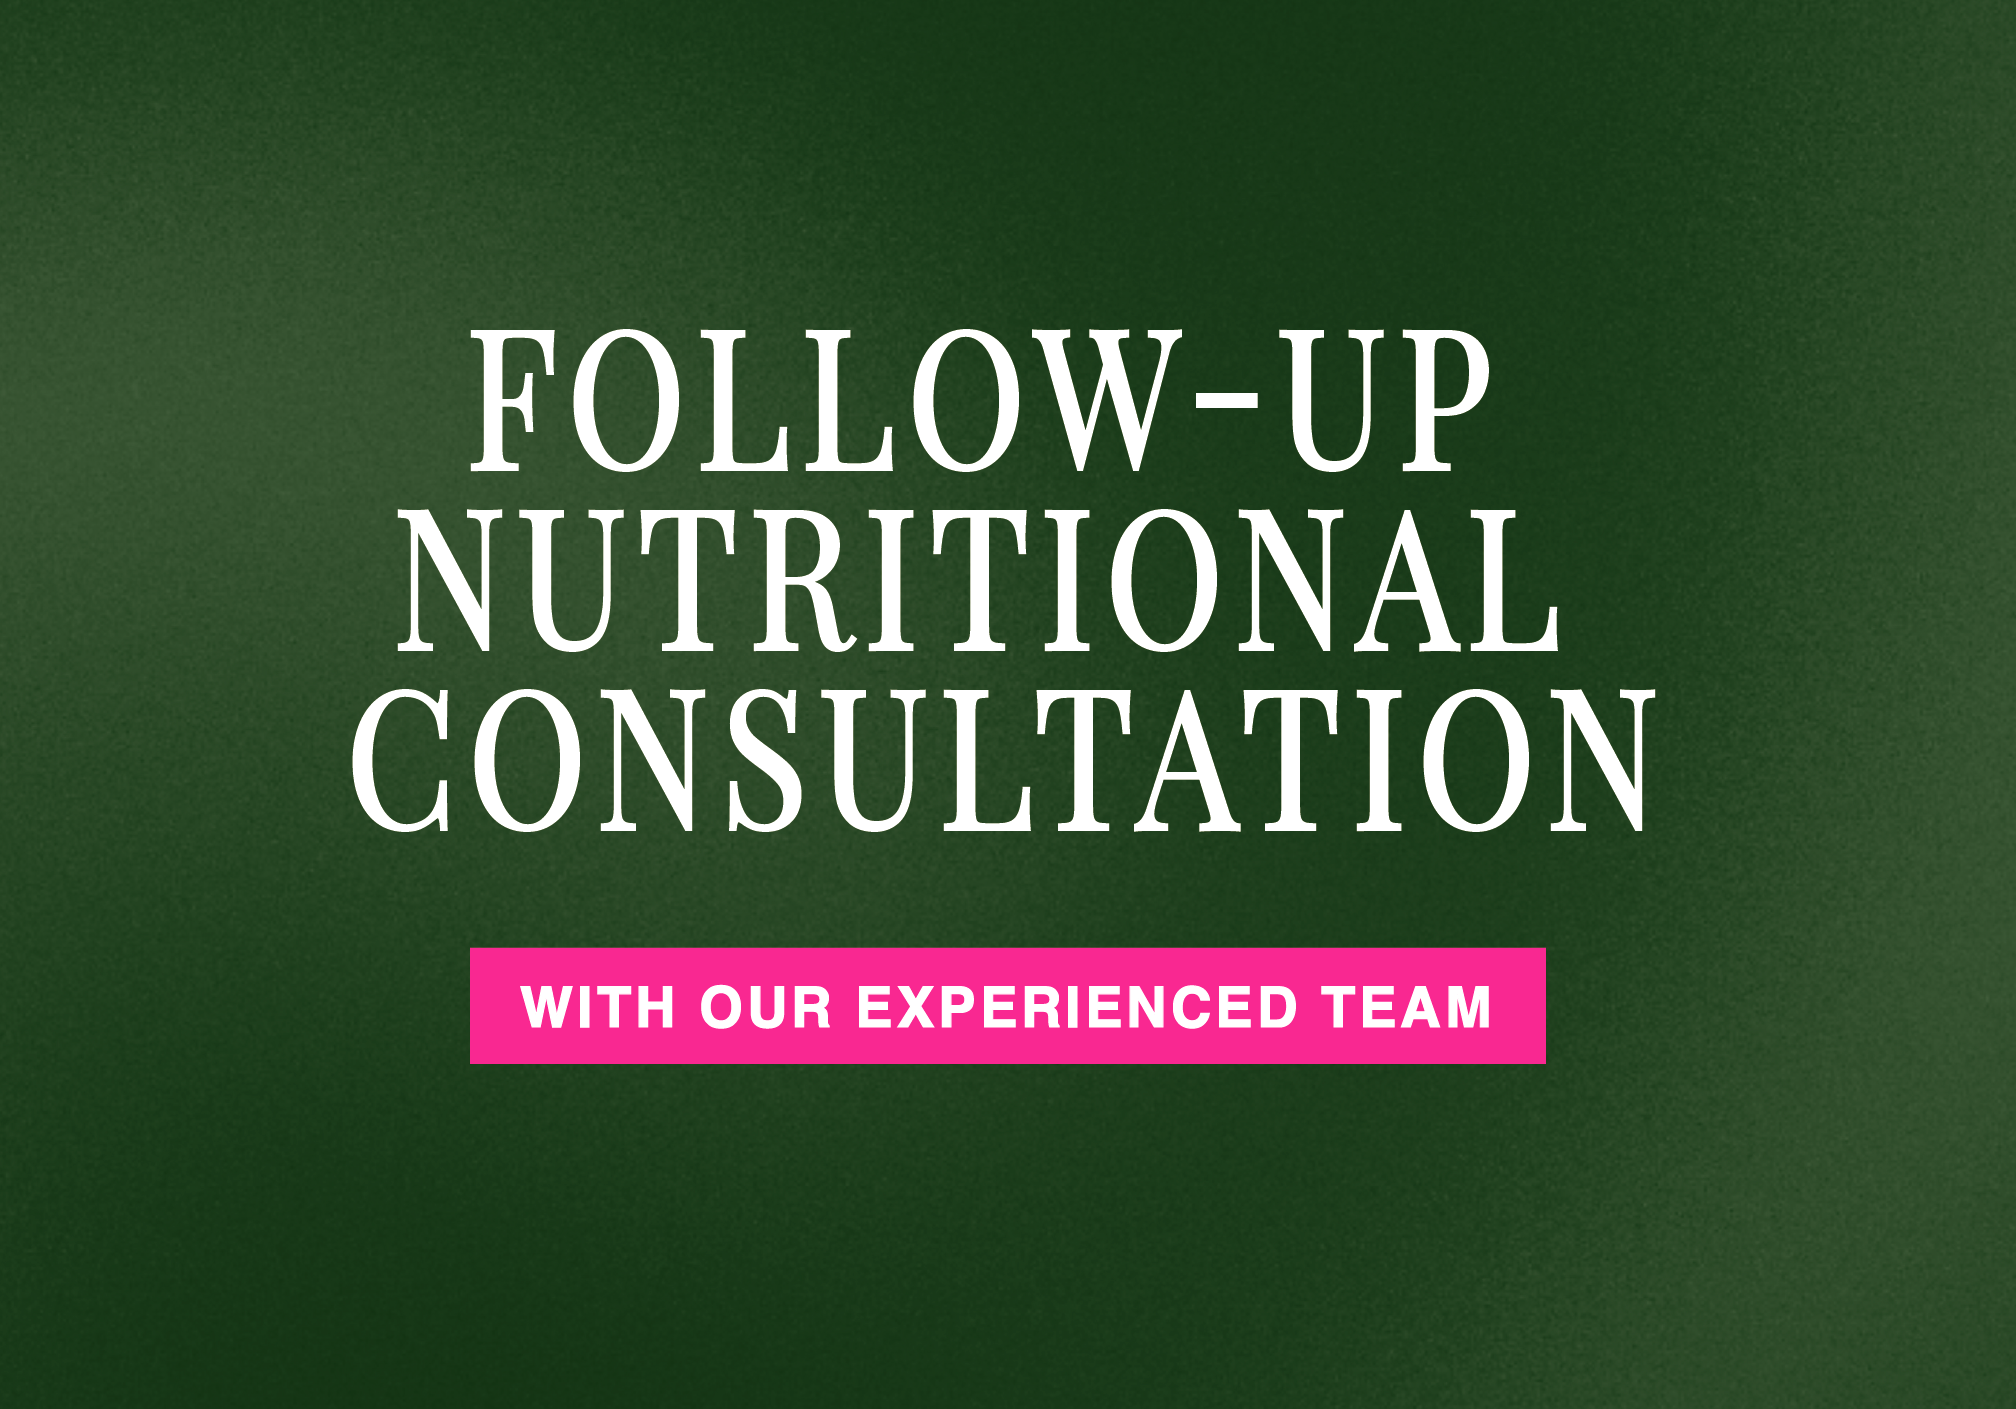 Follow-Up Nutritional Consultation